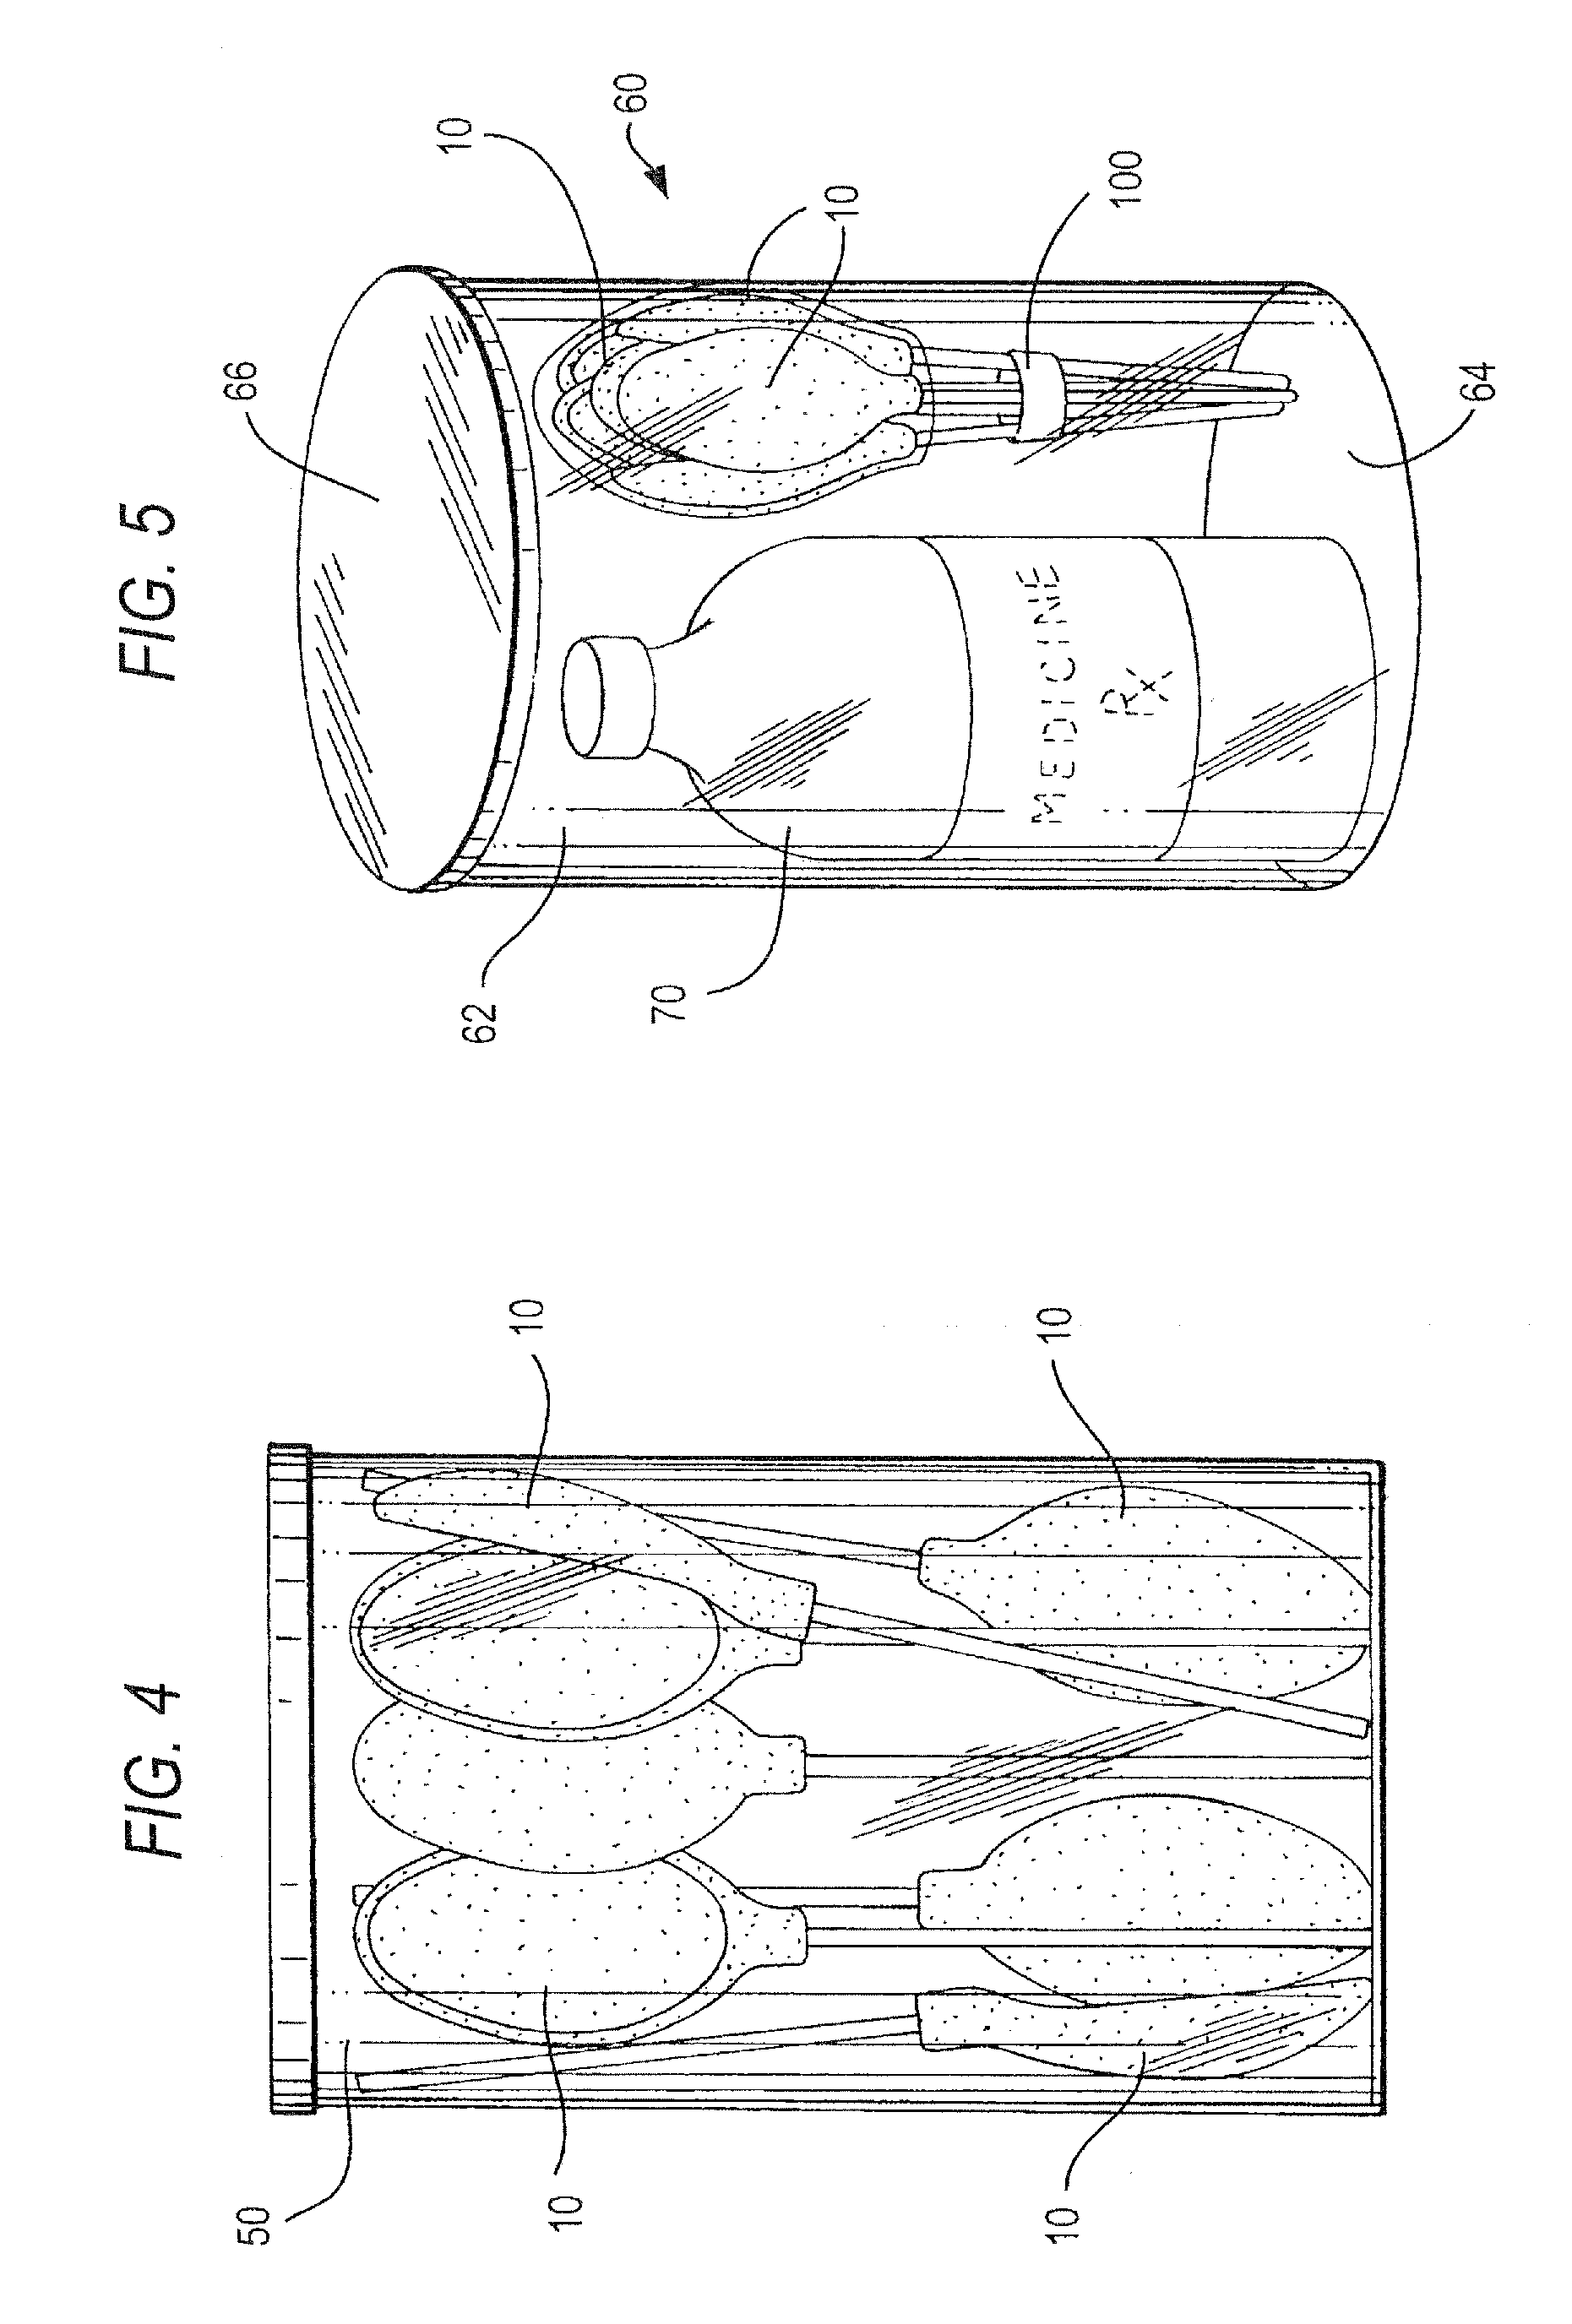 Edible spoon for administering liquid medications